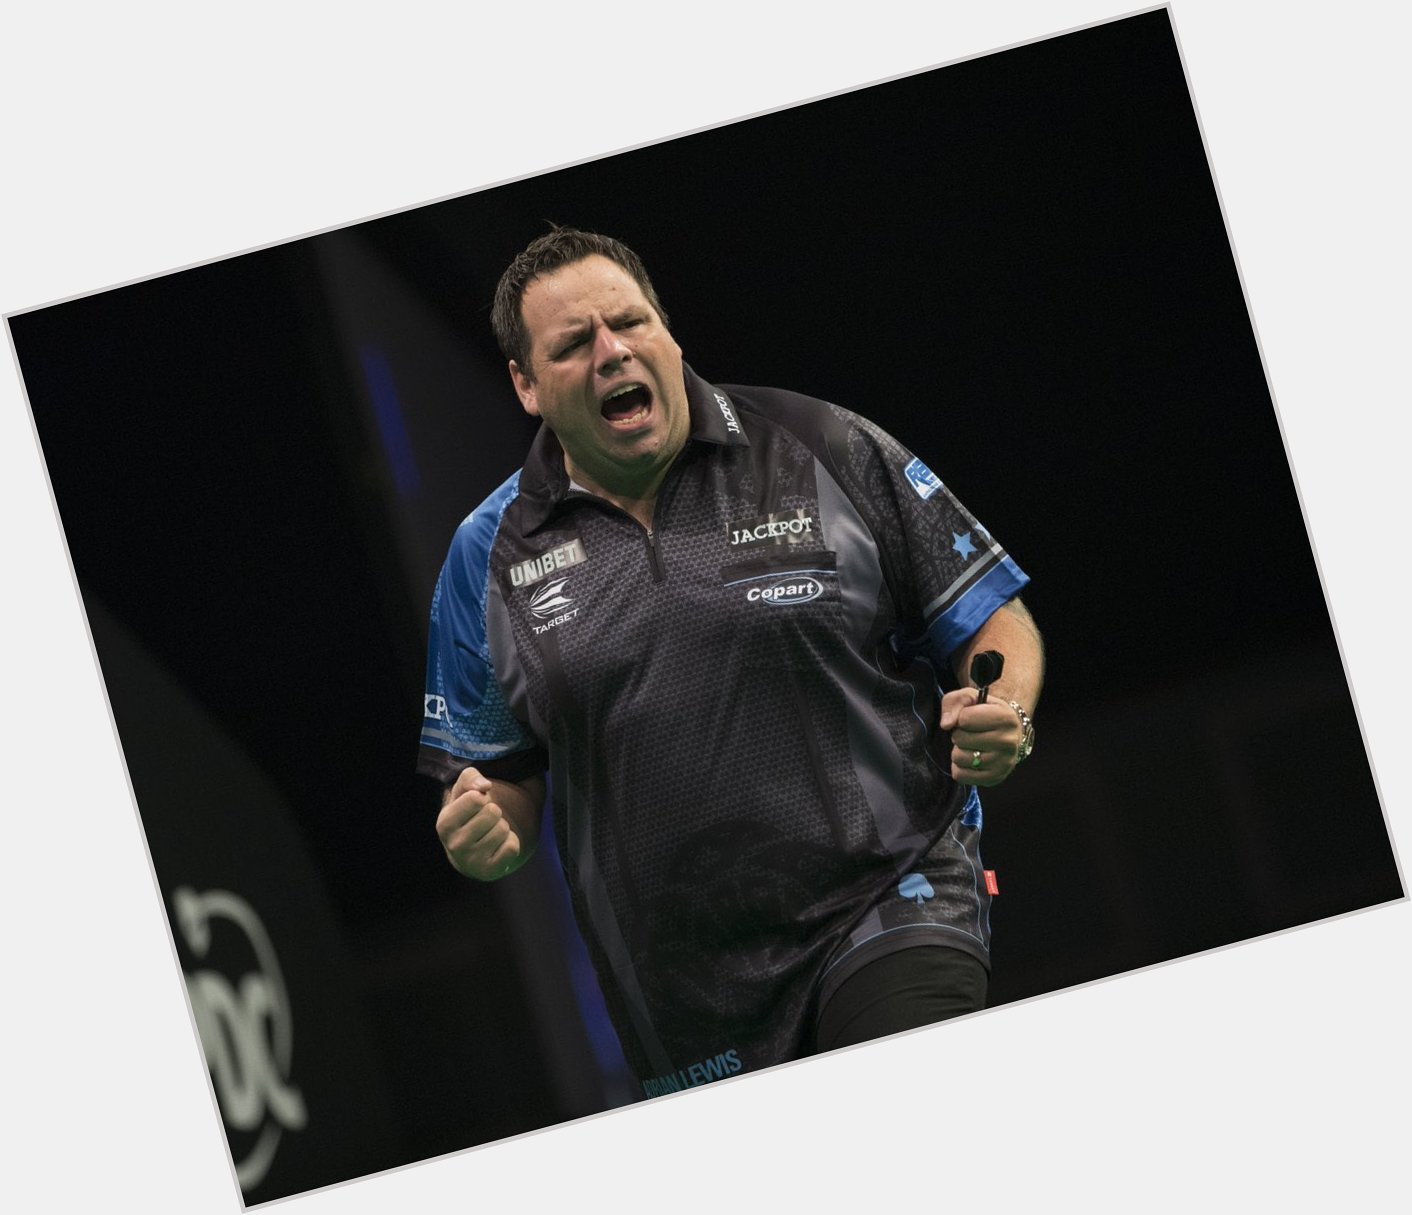 Happy 36th Birthday to the 2 time champion of the world Jackpot Adrian Lewis 